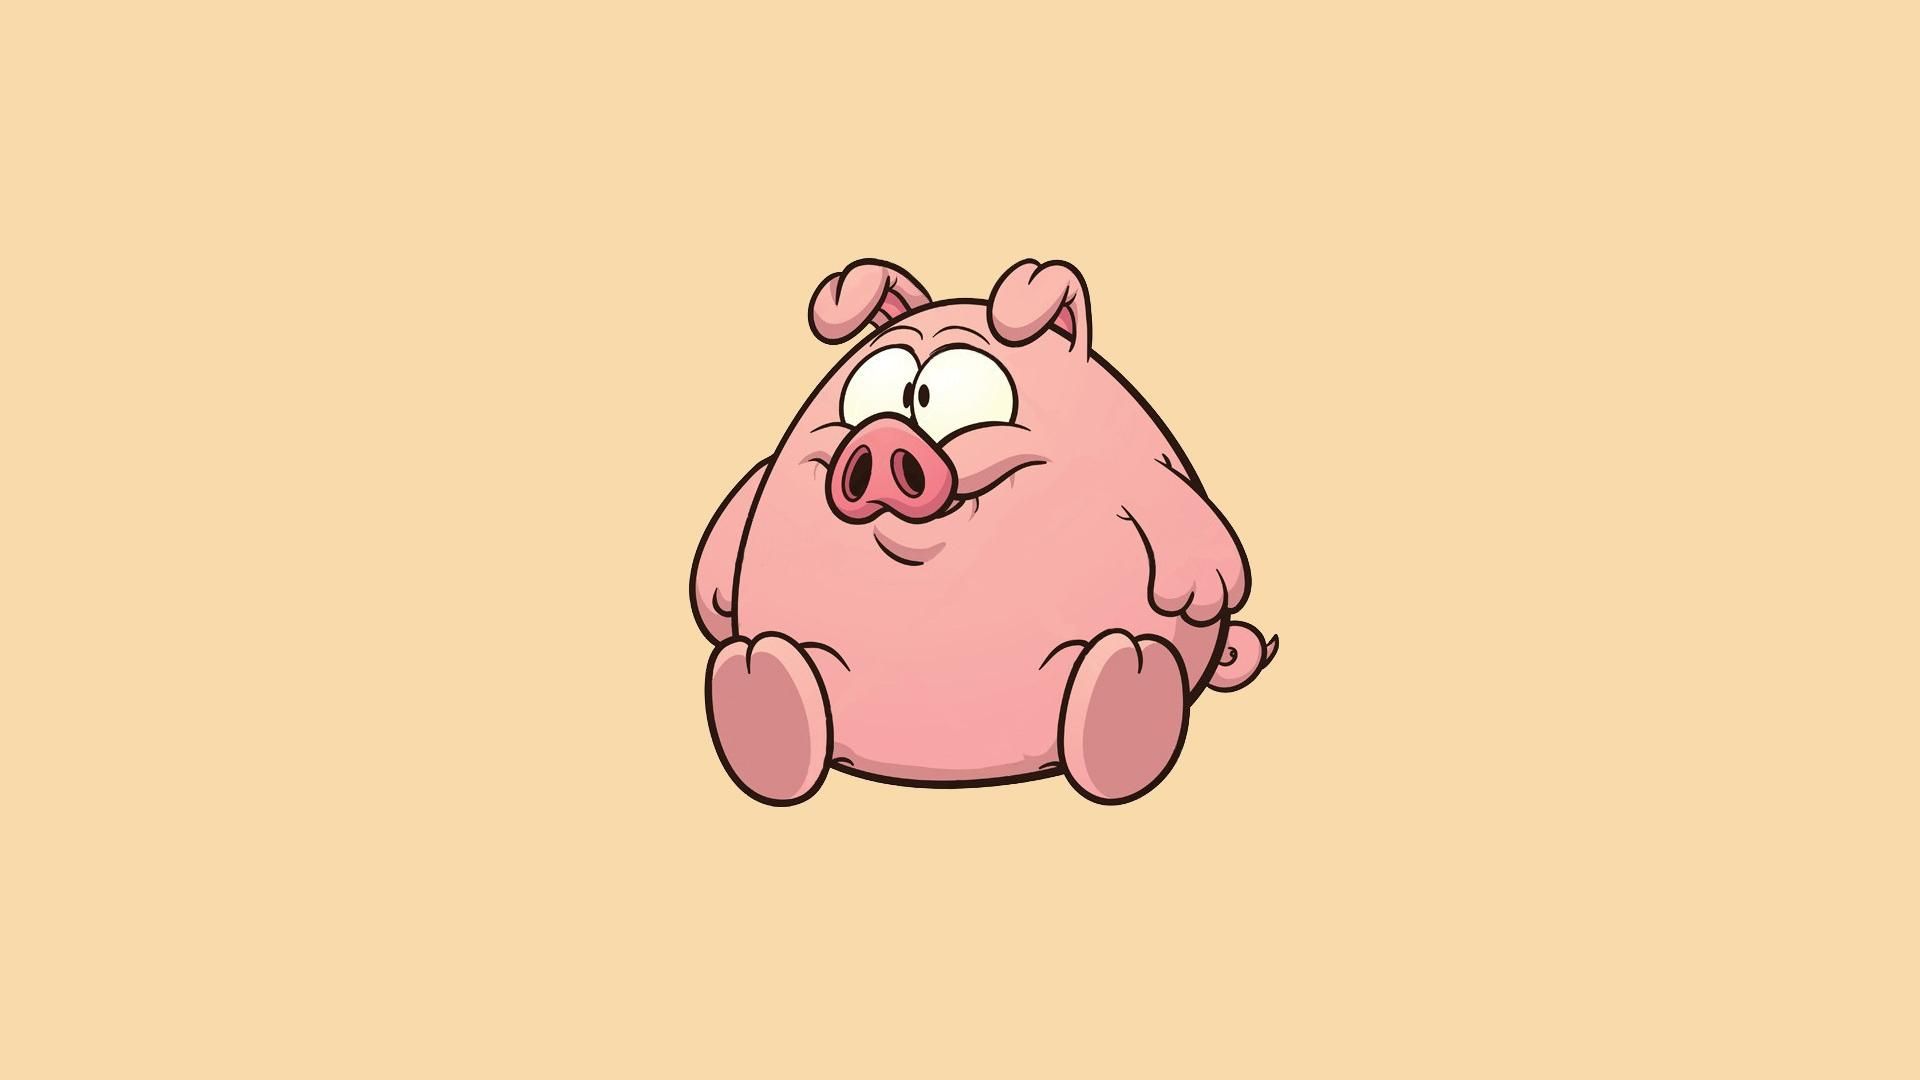 The Wallpapers Hd Pig